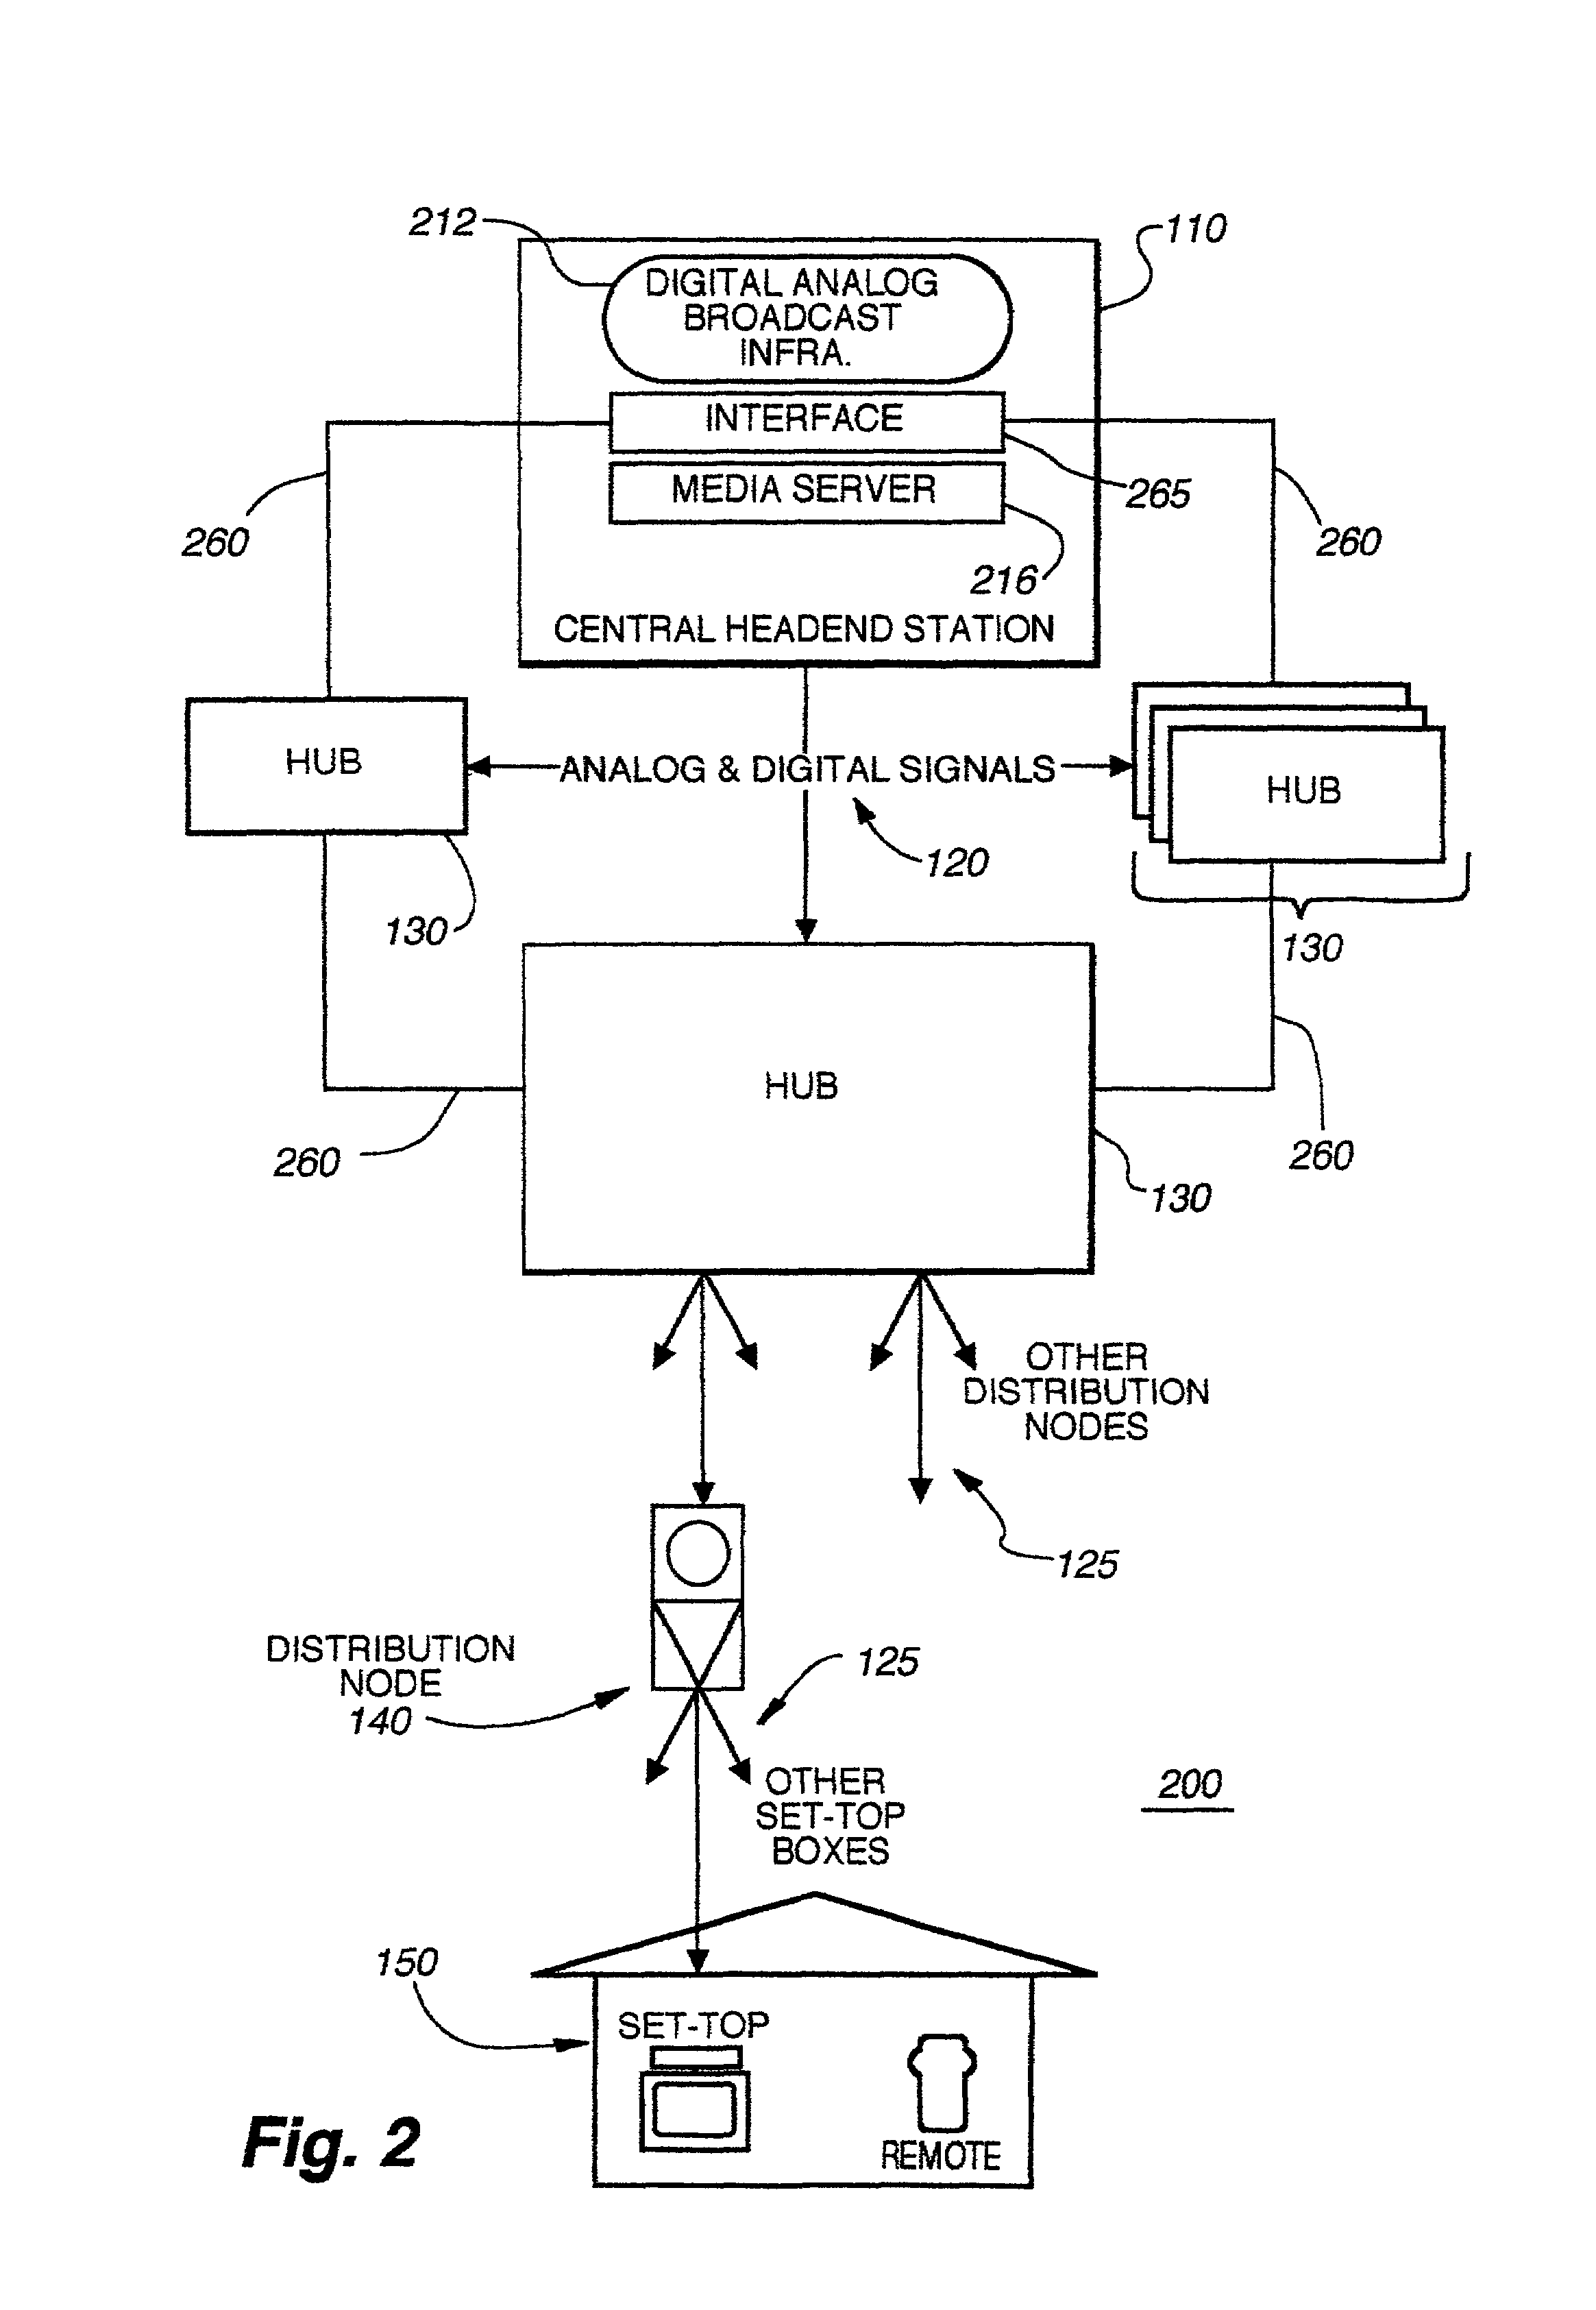 Hybrid central/distributed VOD system with tiered content structure